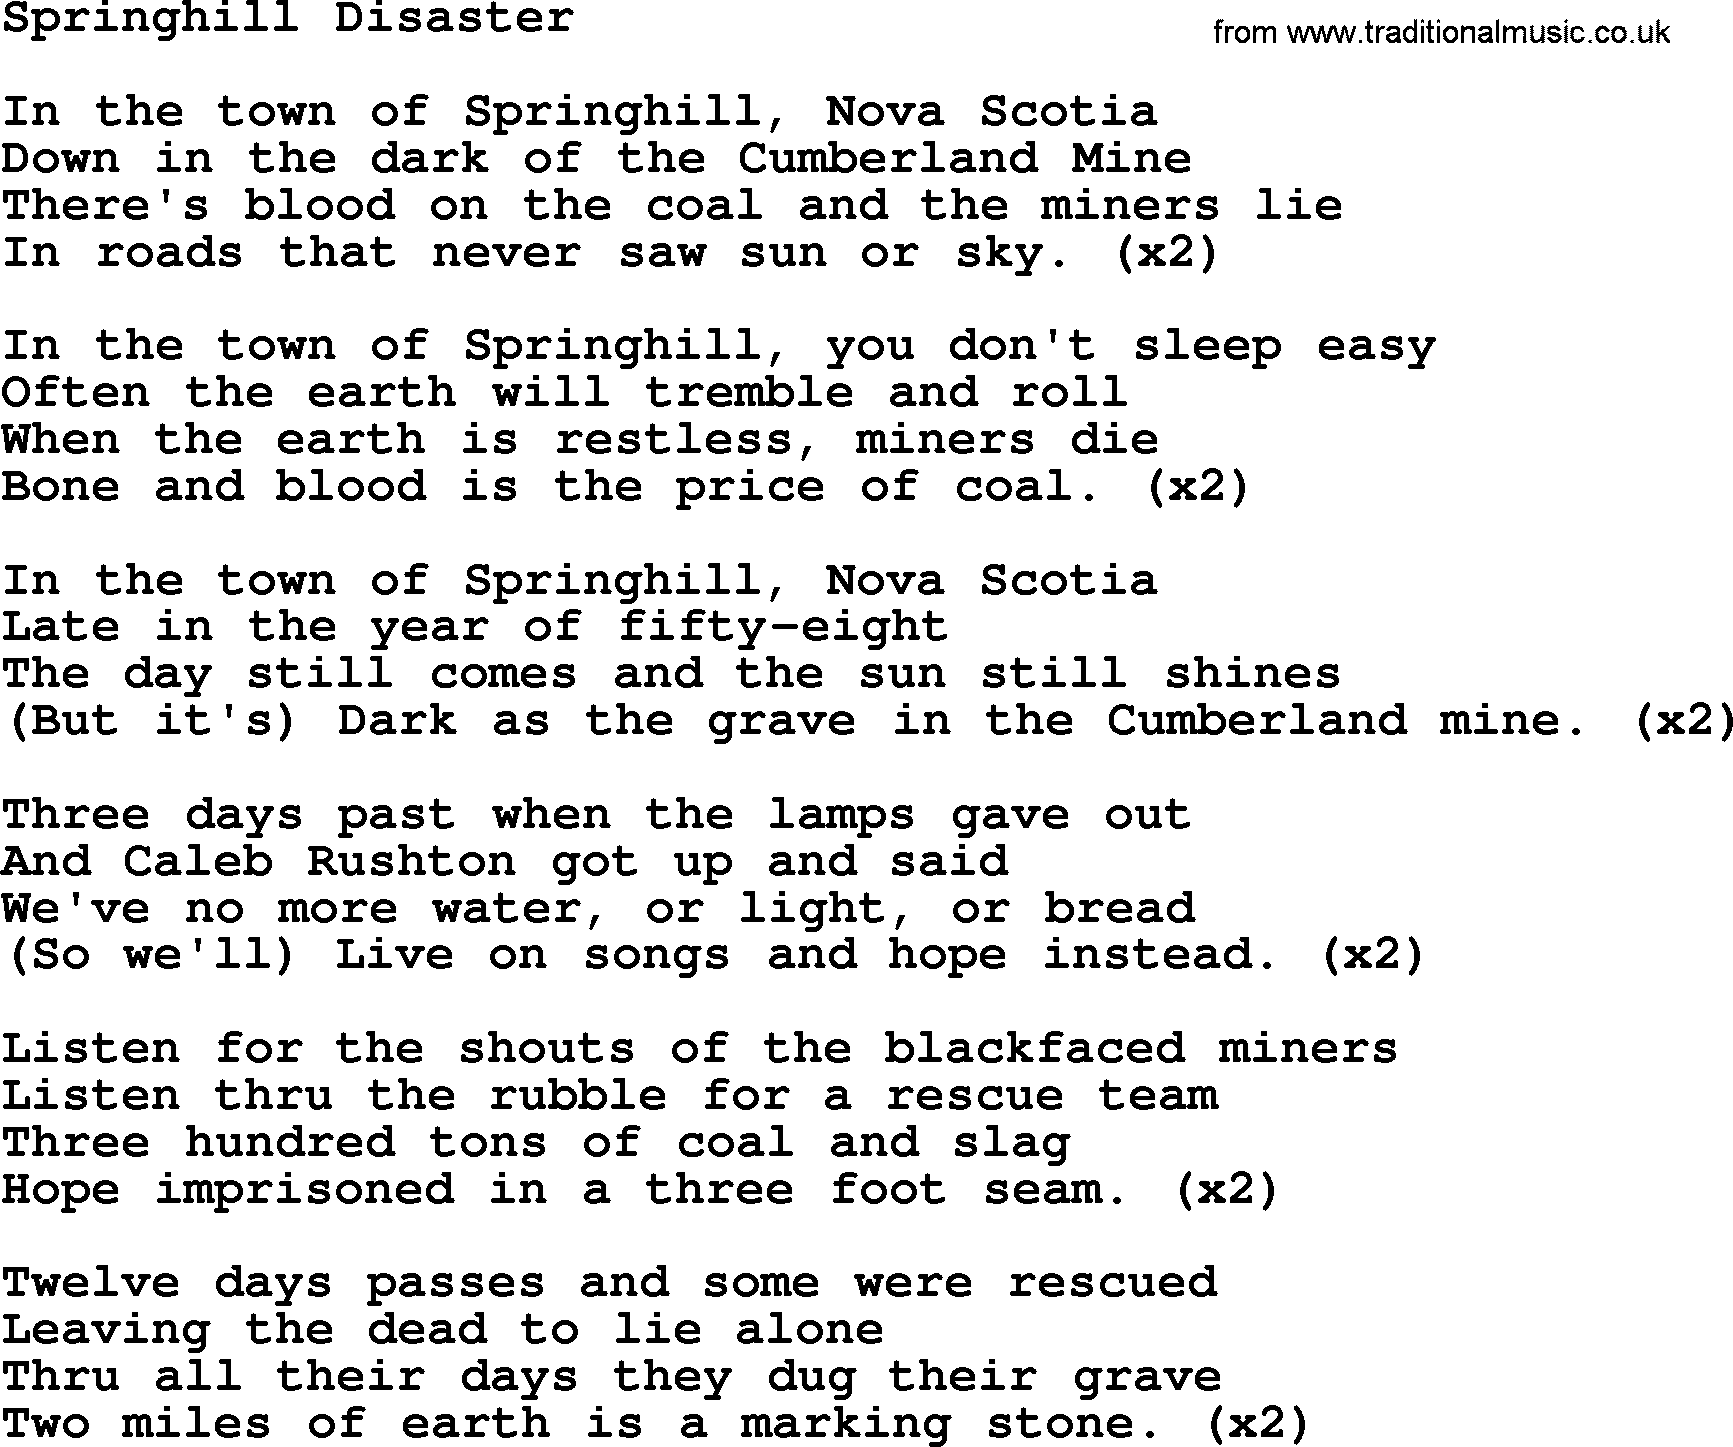 The Dubliners song: Springhill Disaster, lyrics